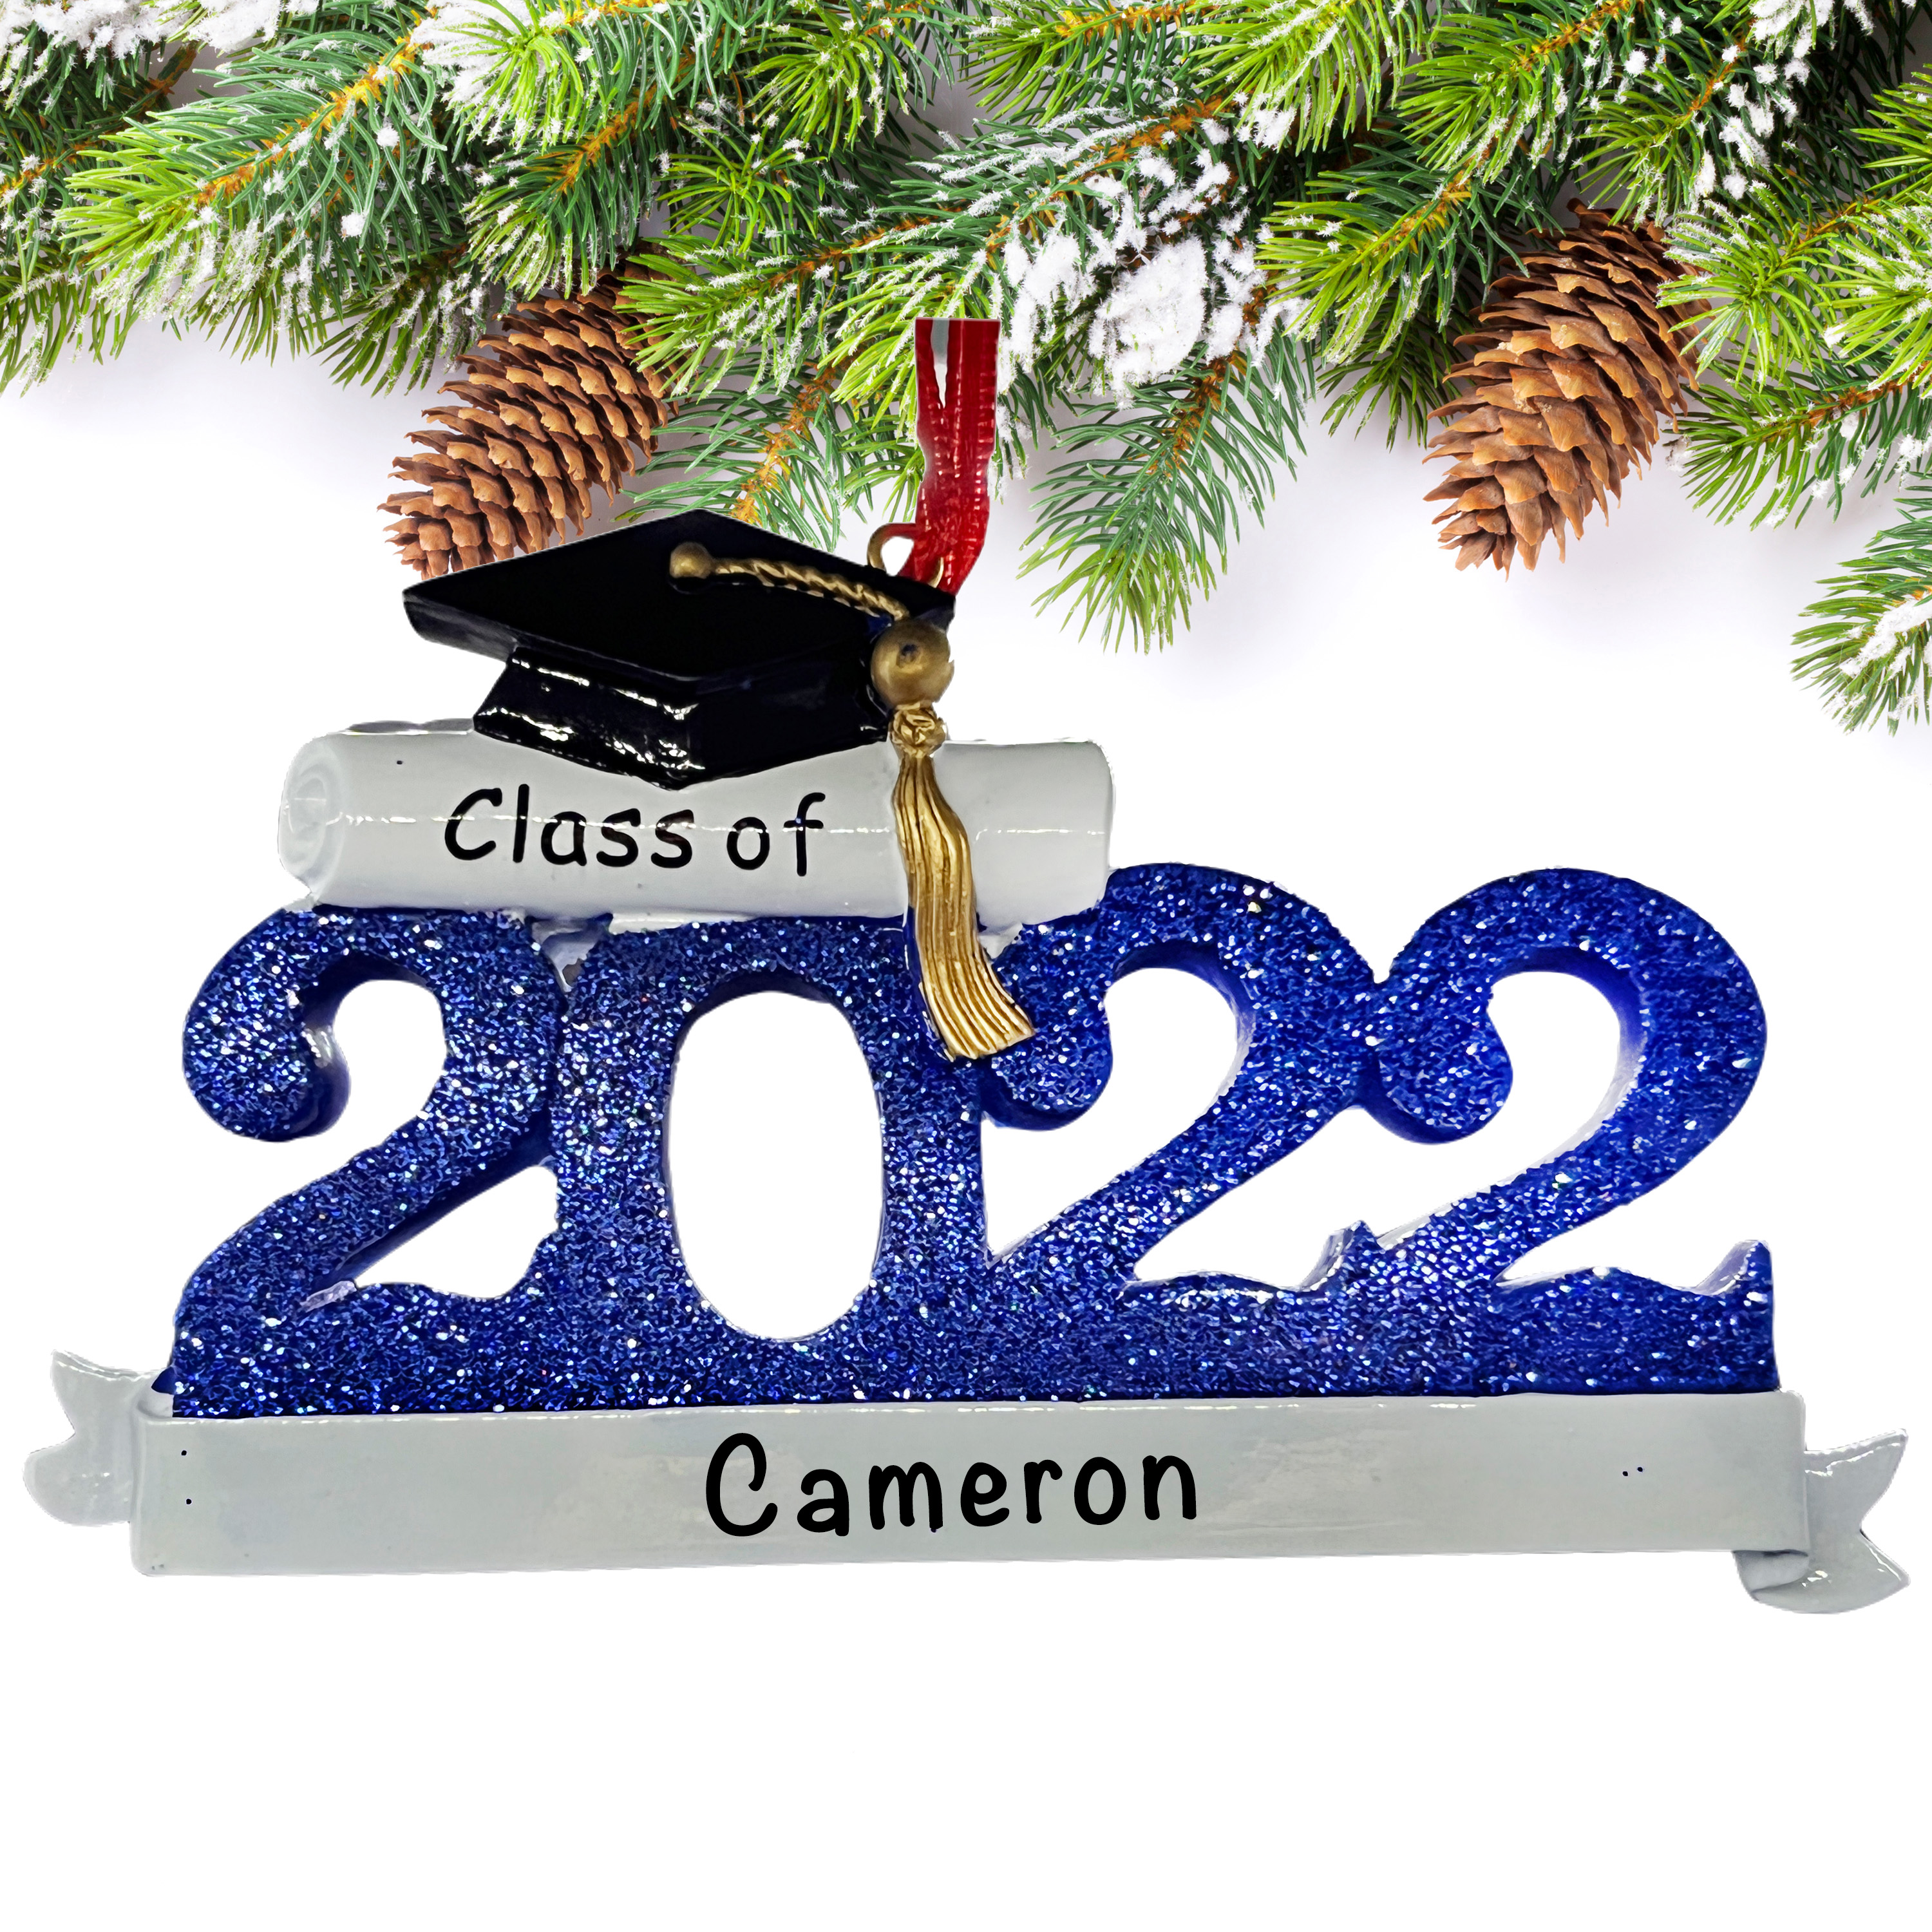 Graduation Ornament - Personalized Christmas Ornament for Grads Blue - Holiday Traditions